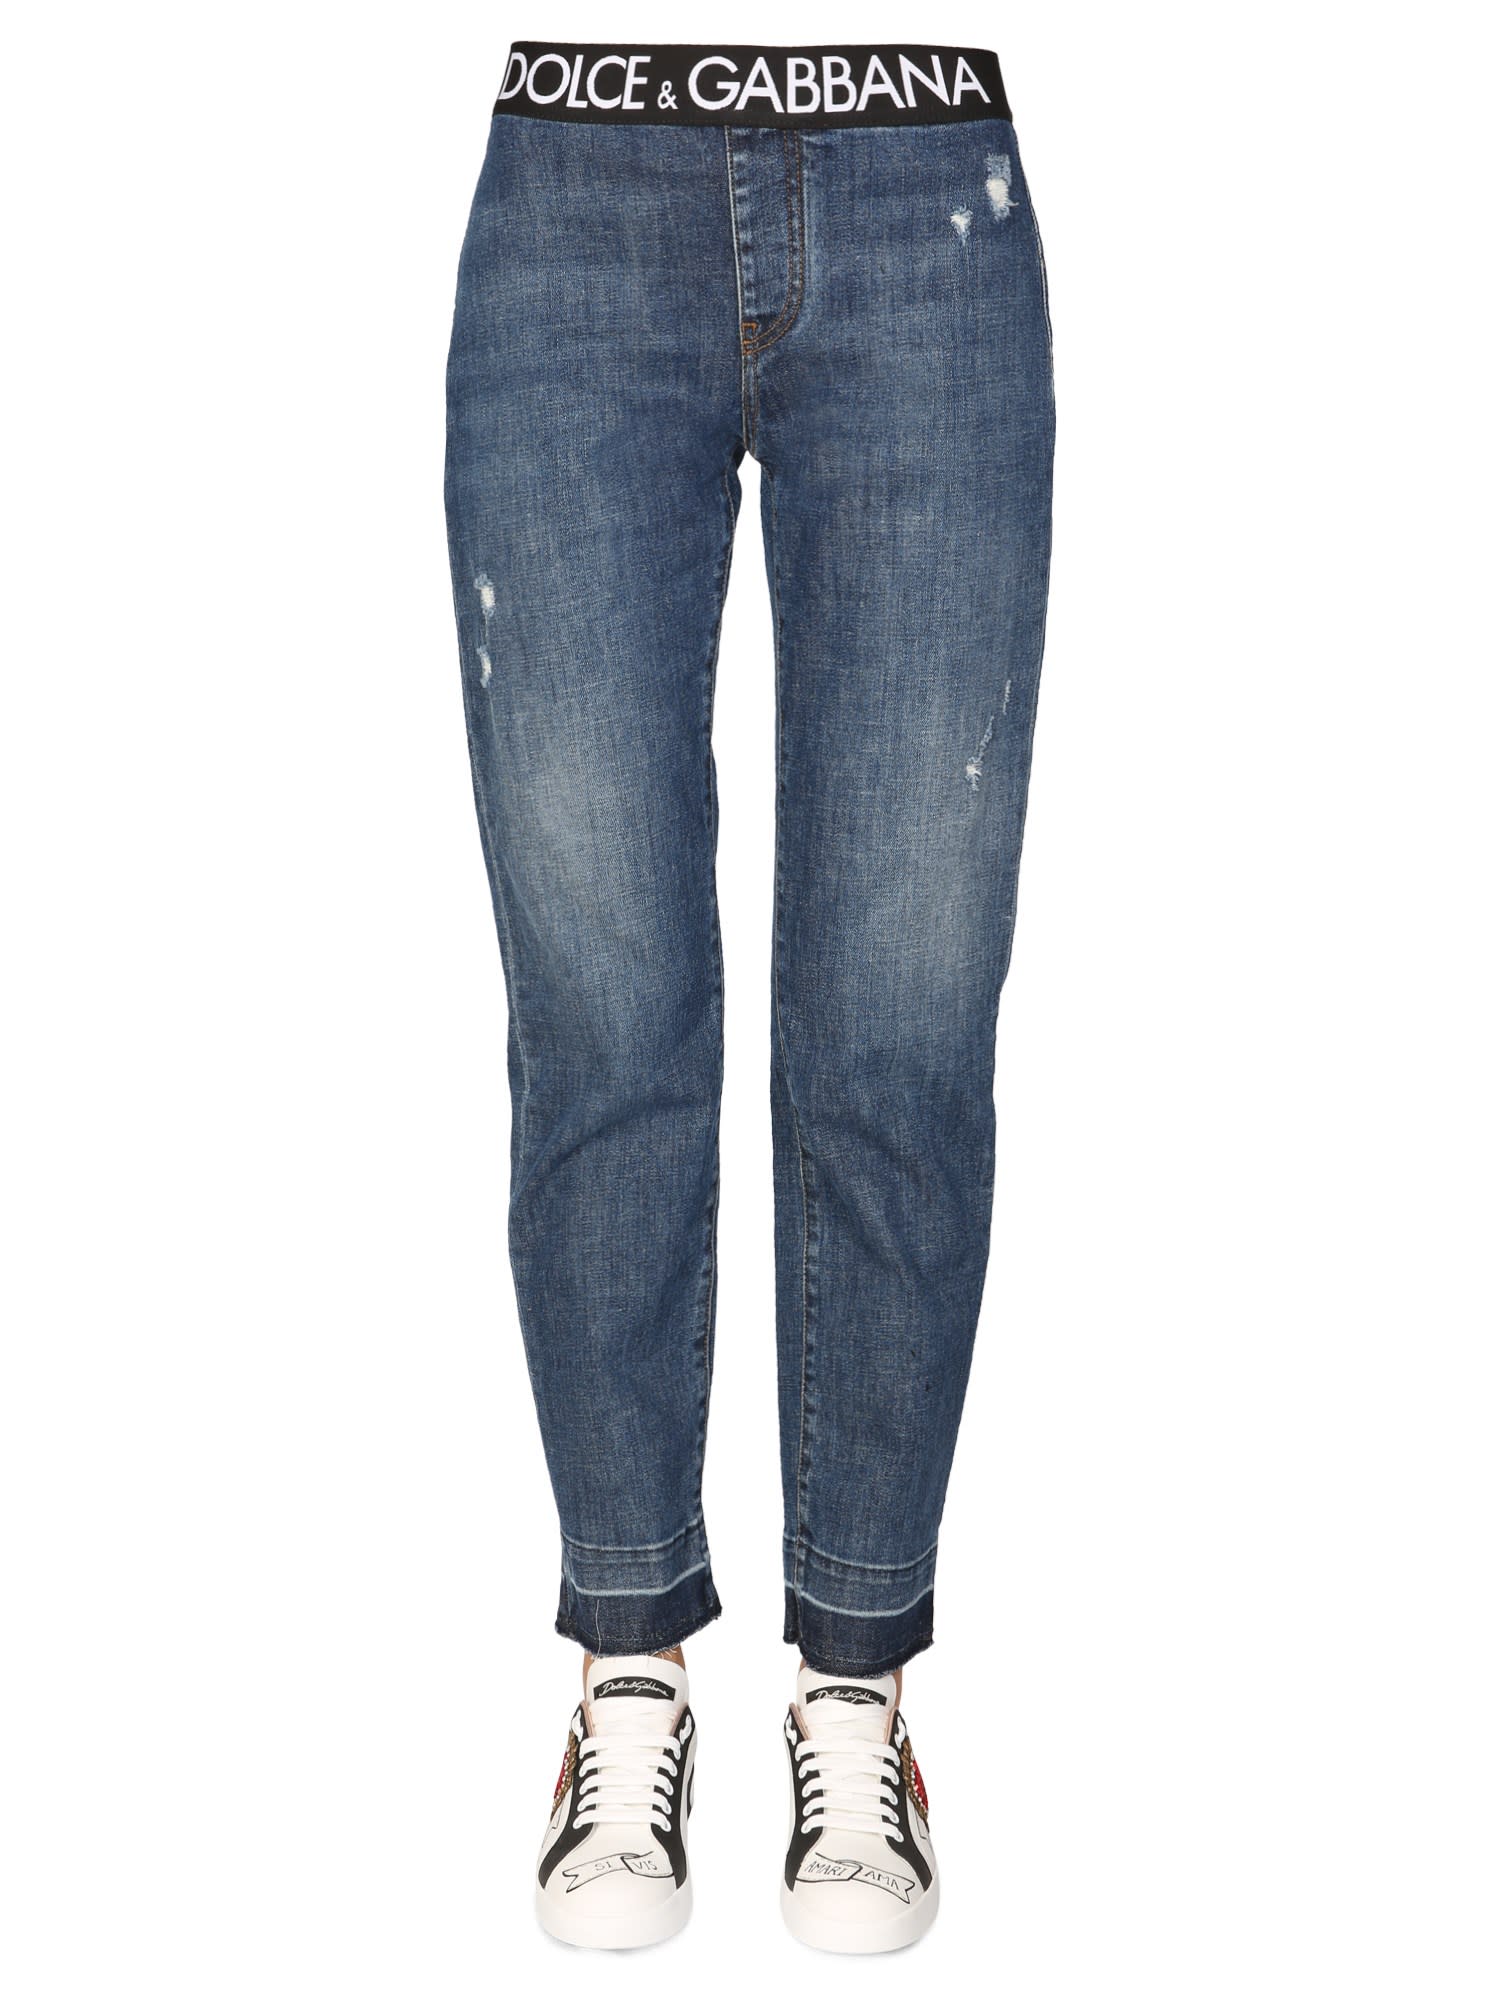 Dolce & Gabbana Jeans With Logoed Elastic